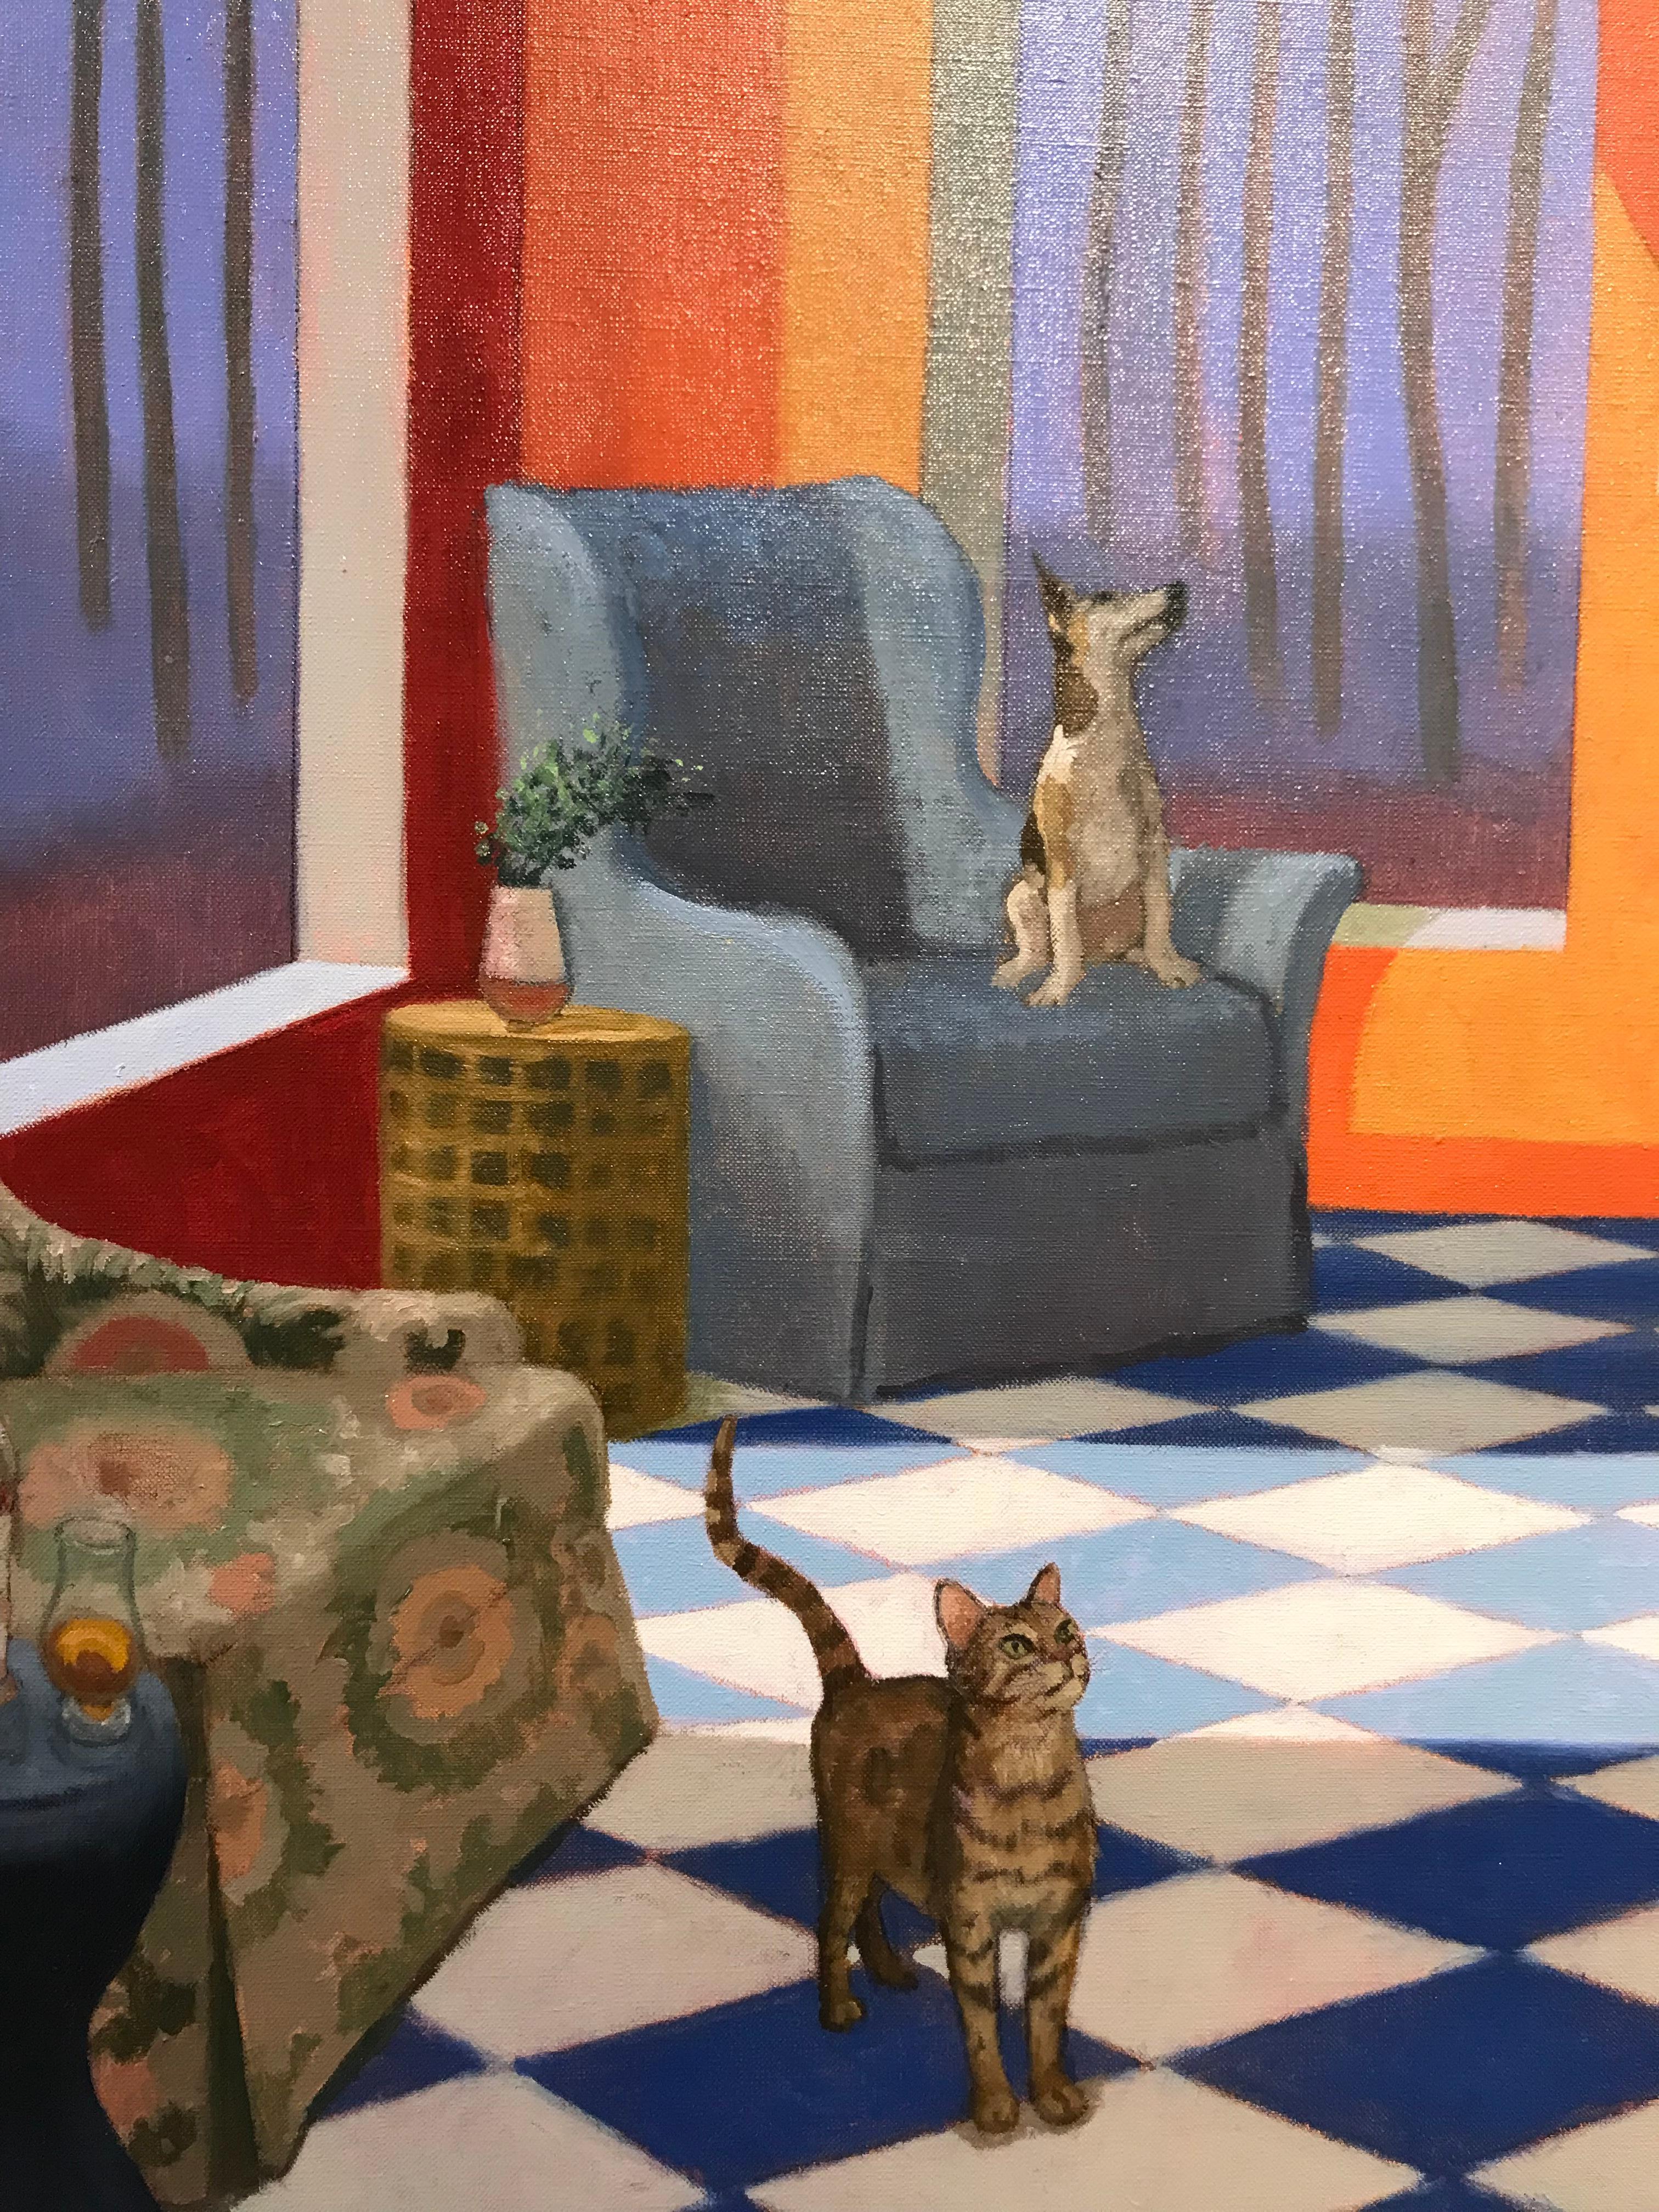 Someone Dancing, a colorful, blue and orange narrative painting with animals - Painting by Kathryn Freeman